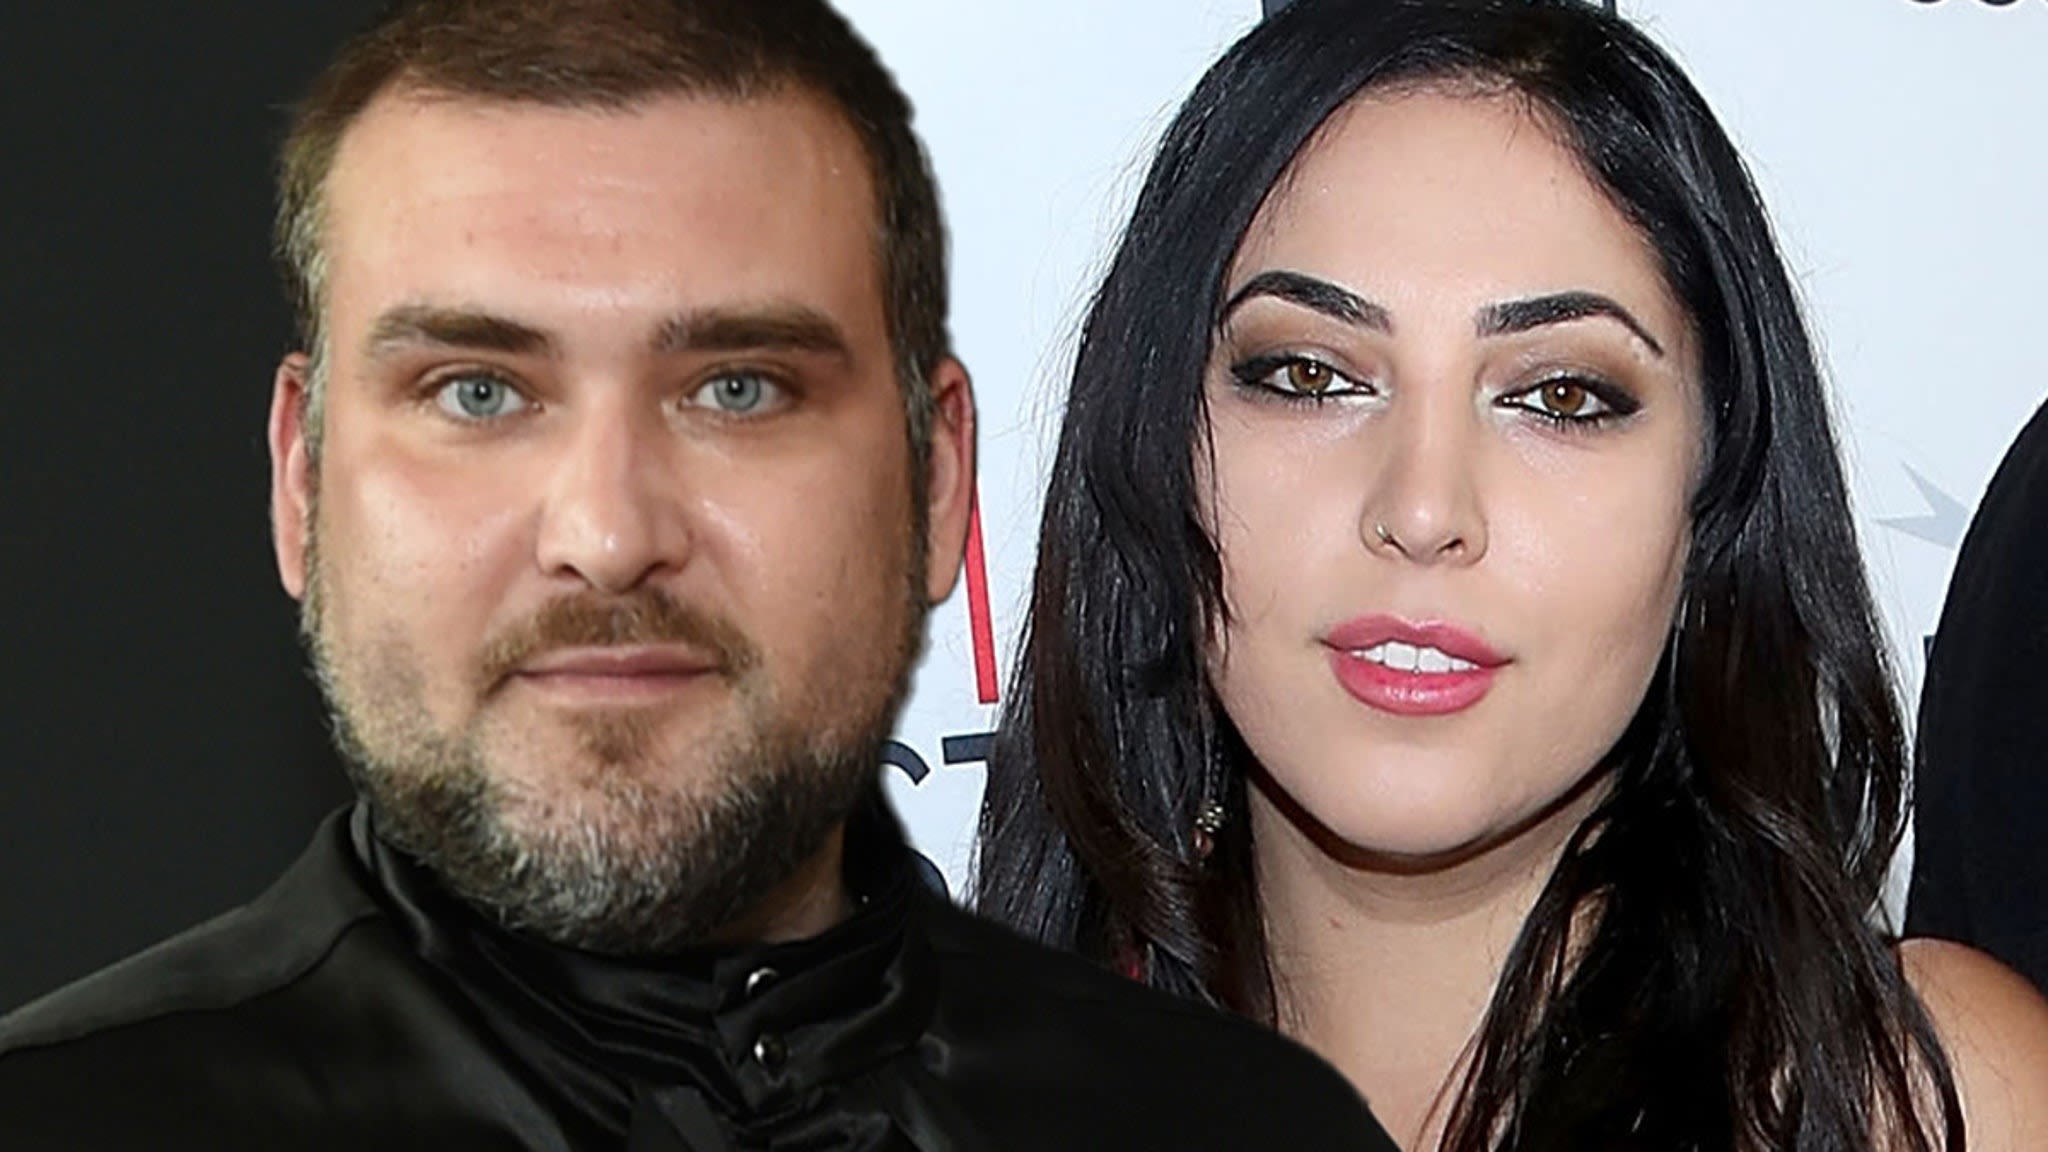 Nic Cage's Son Weston Finalizes Divorce with Wife After Lengthy Battle